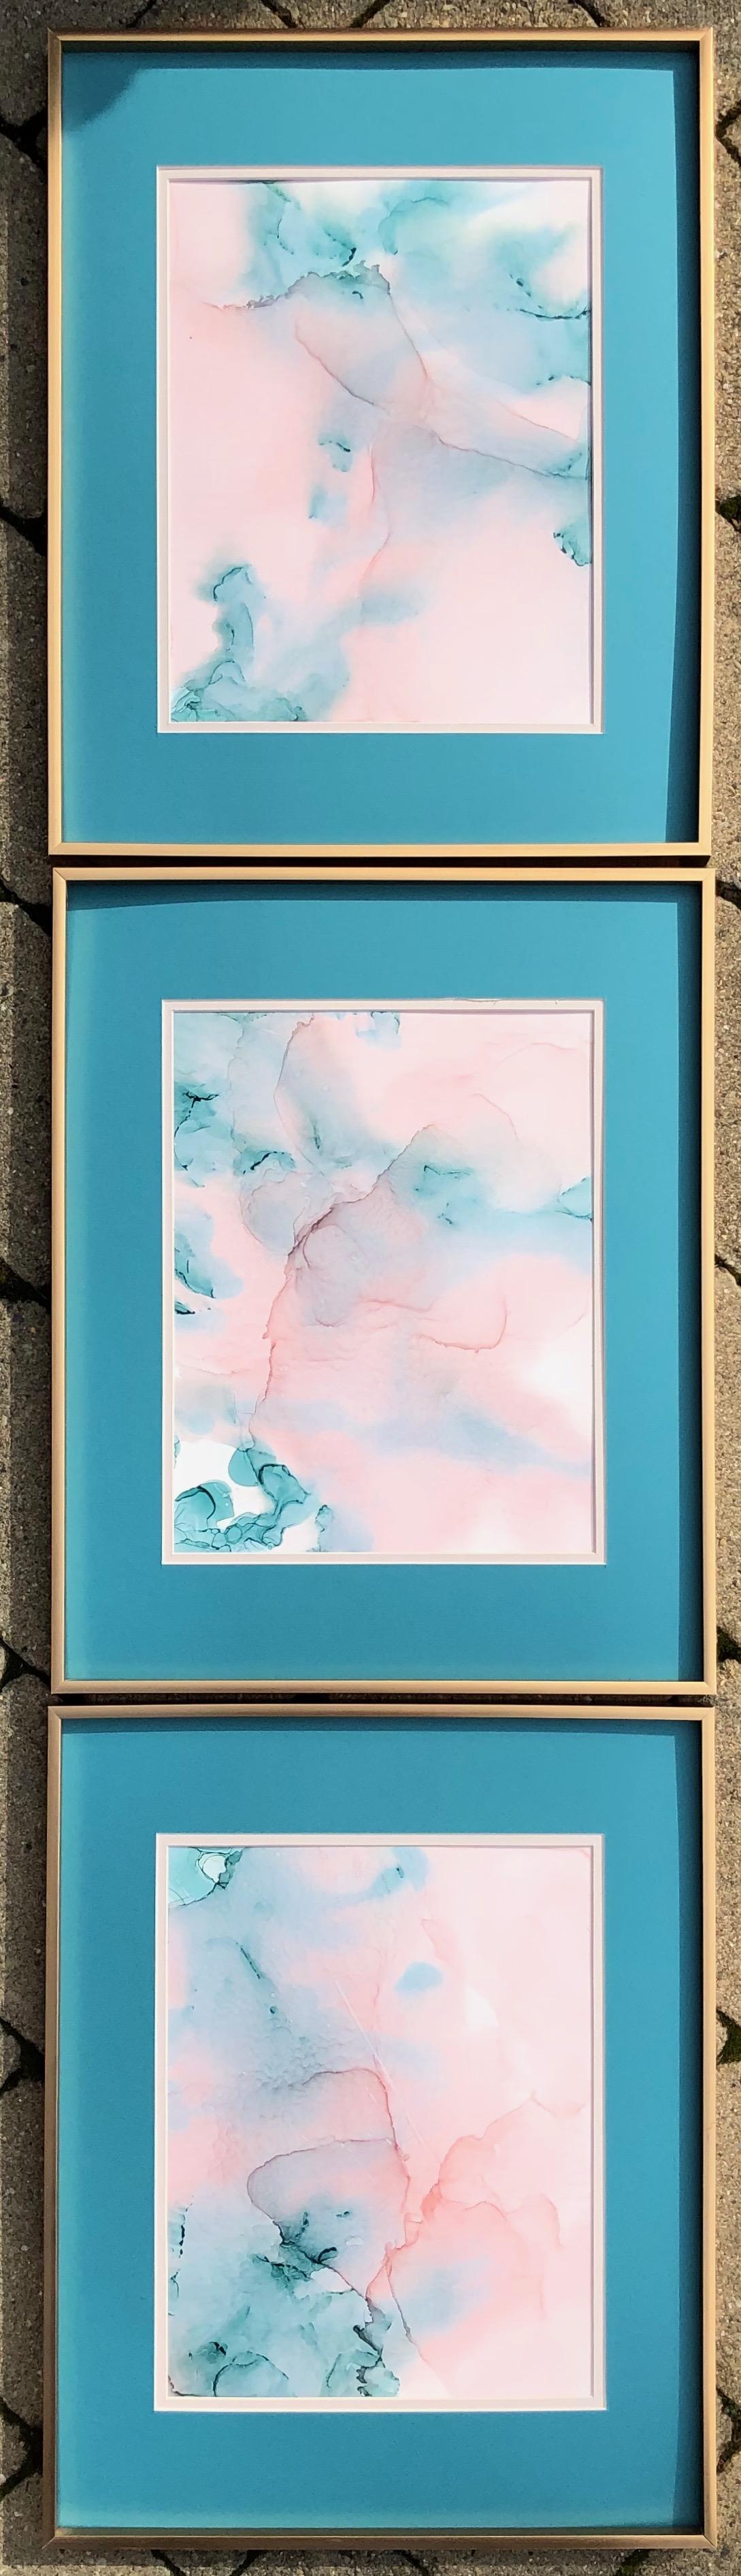 Cote D'Azur- abstraction art, made in pale pink, turquoise color